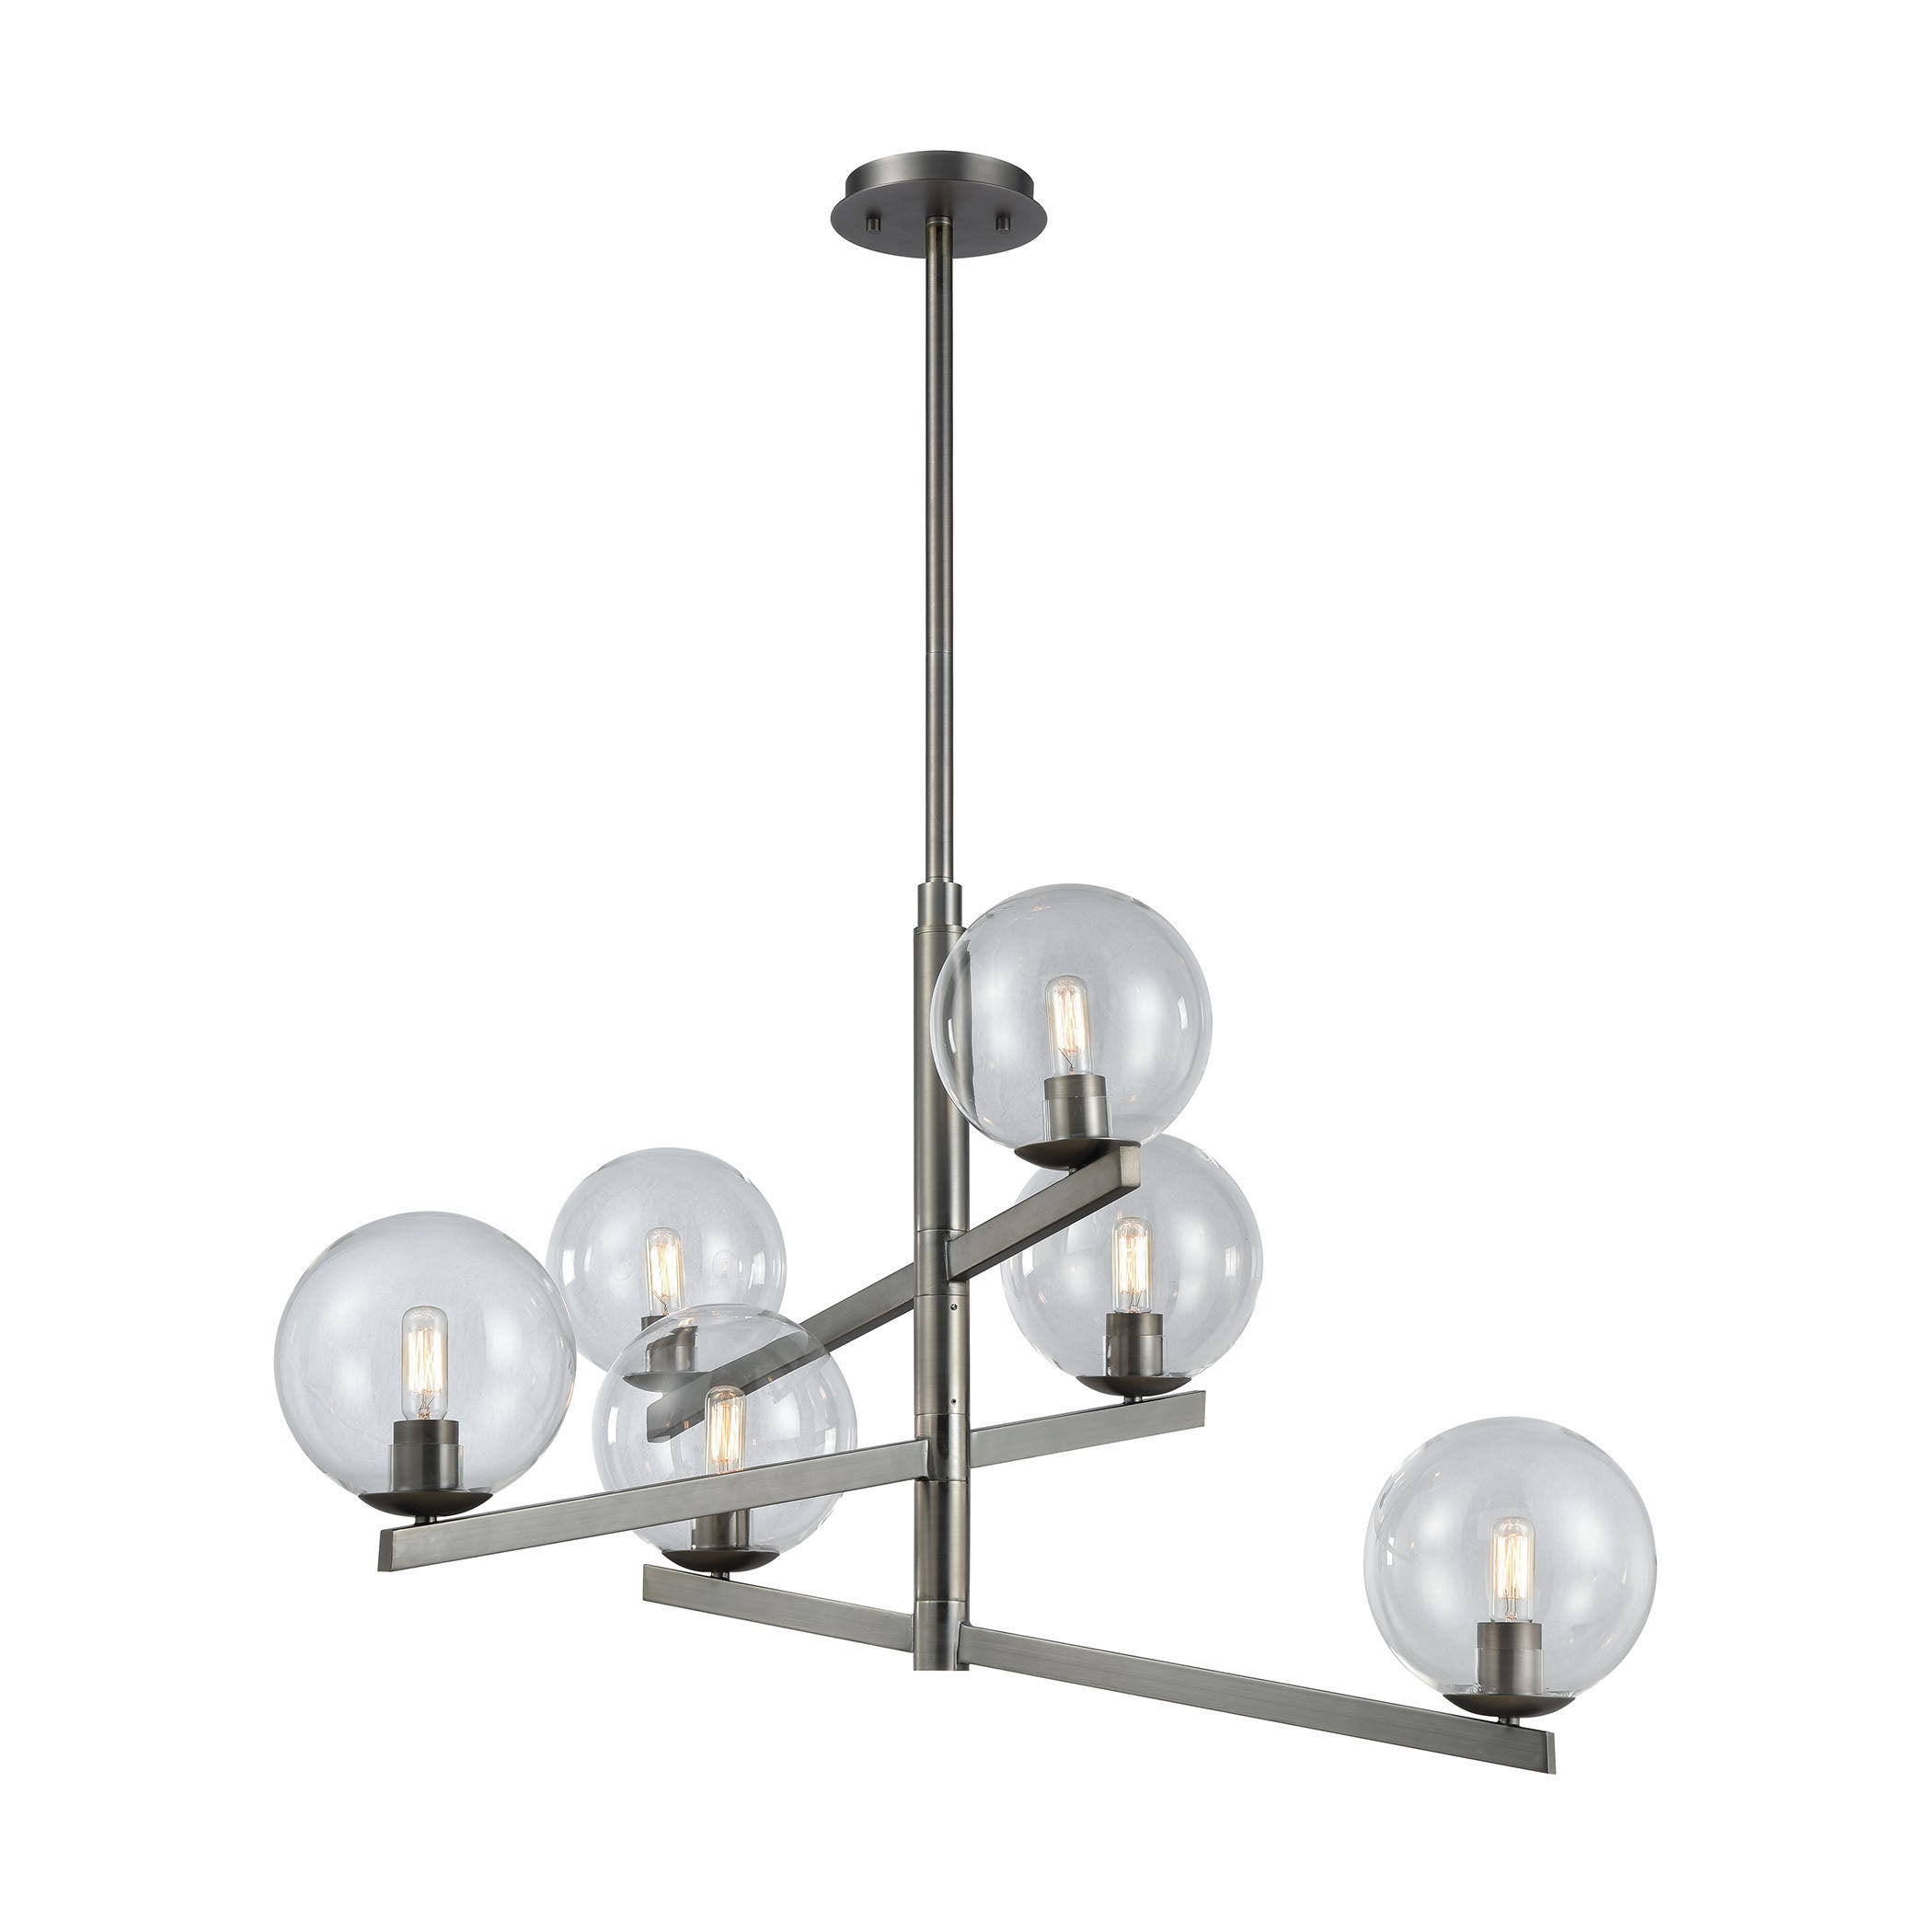 ELK Lighting 12182/6 Globes of Light 6-Light Chandelier in Brushed Black Nickel with Clear Blown Glass